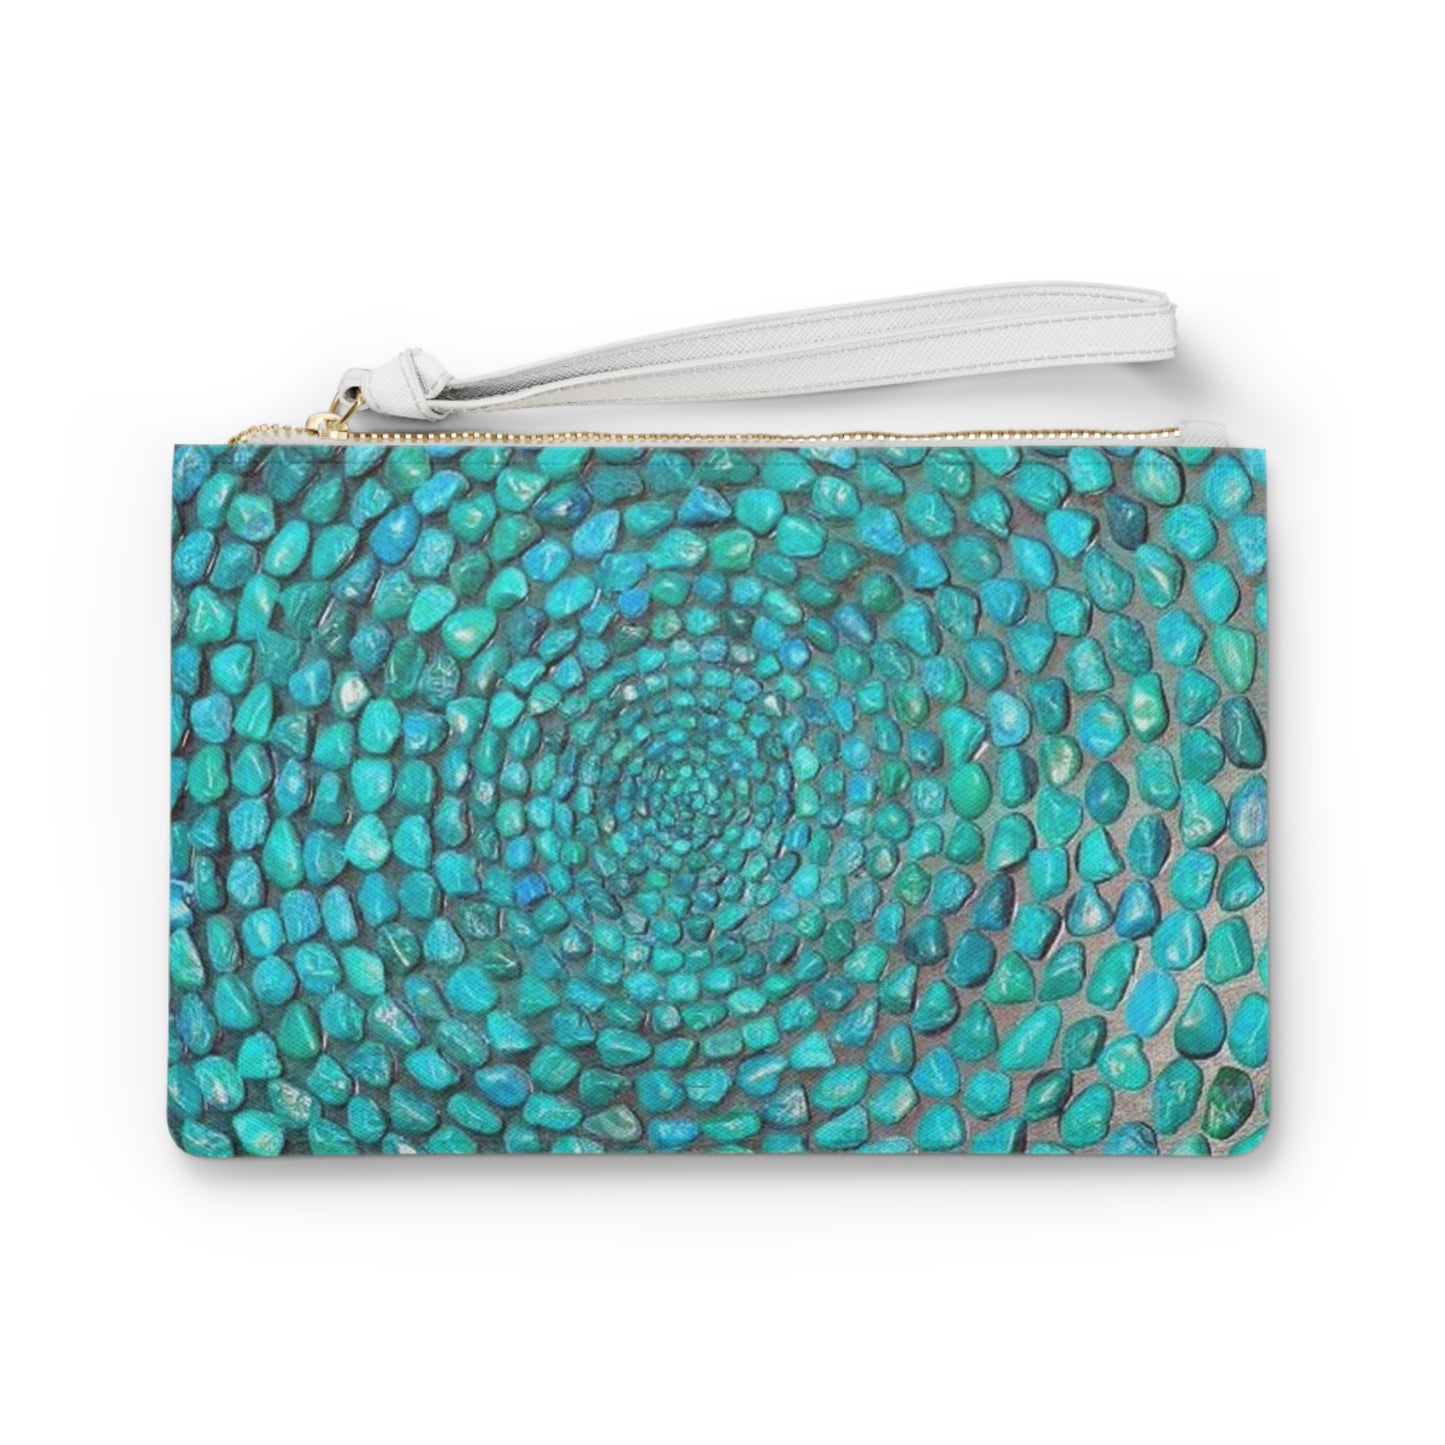 Turquoise Stones Natural Pouch Clutch Bag